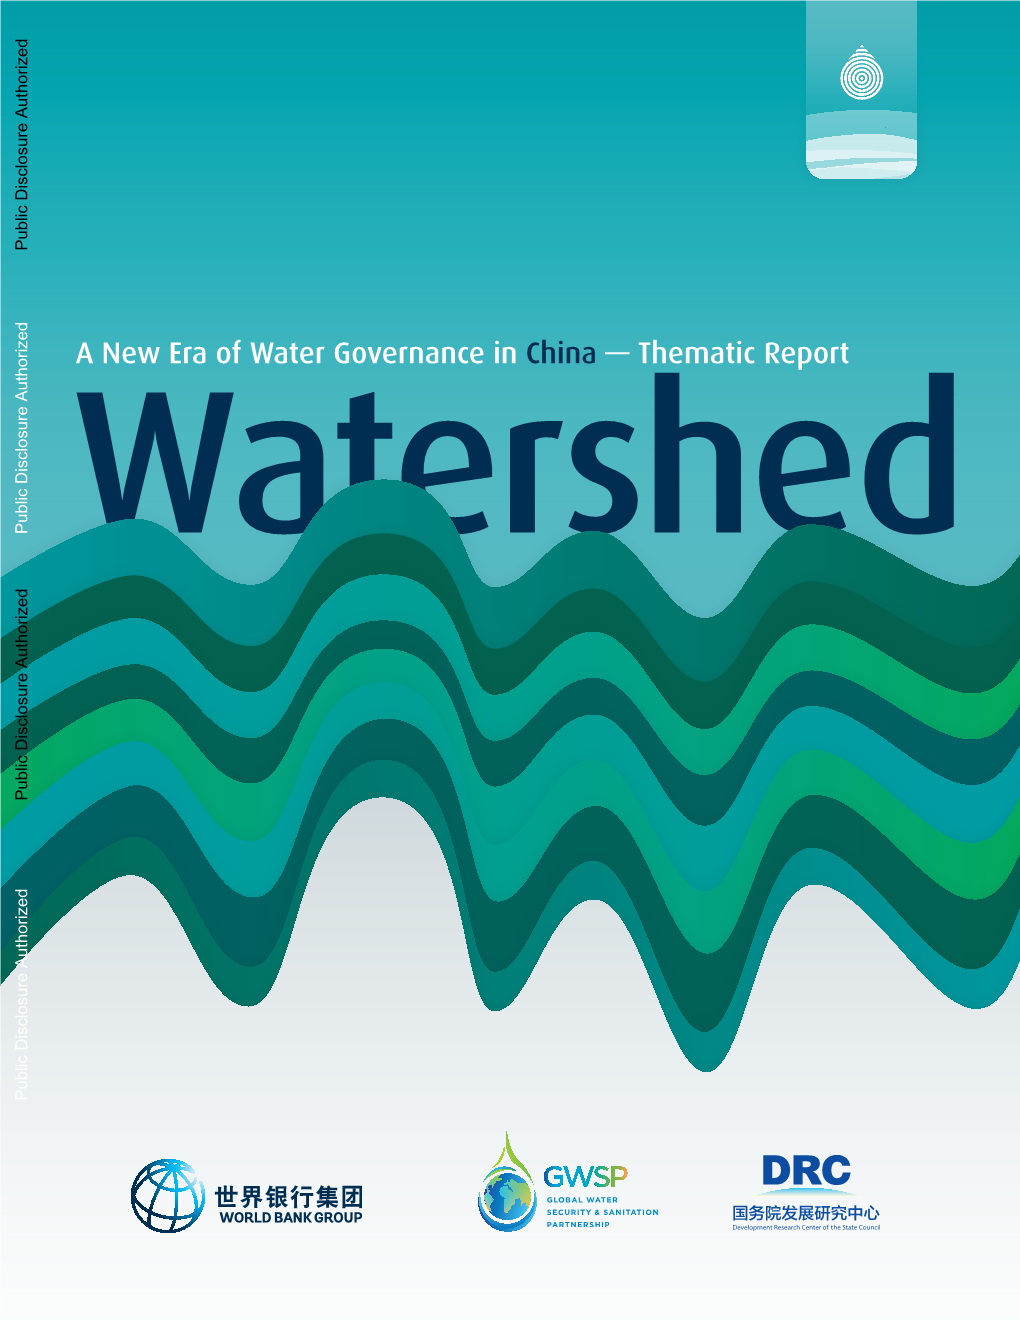 A New Era of Water Governance in China — Thematic Report